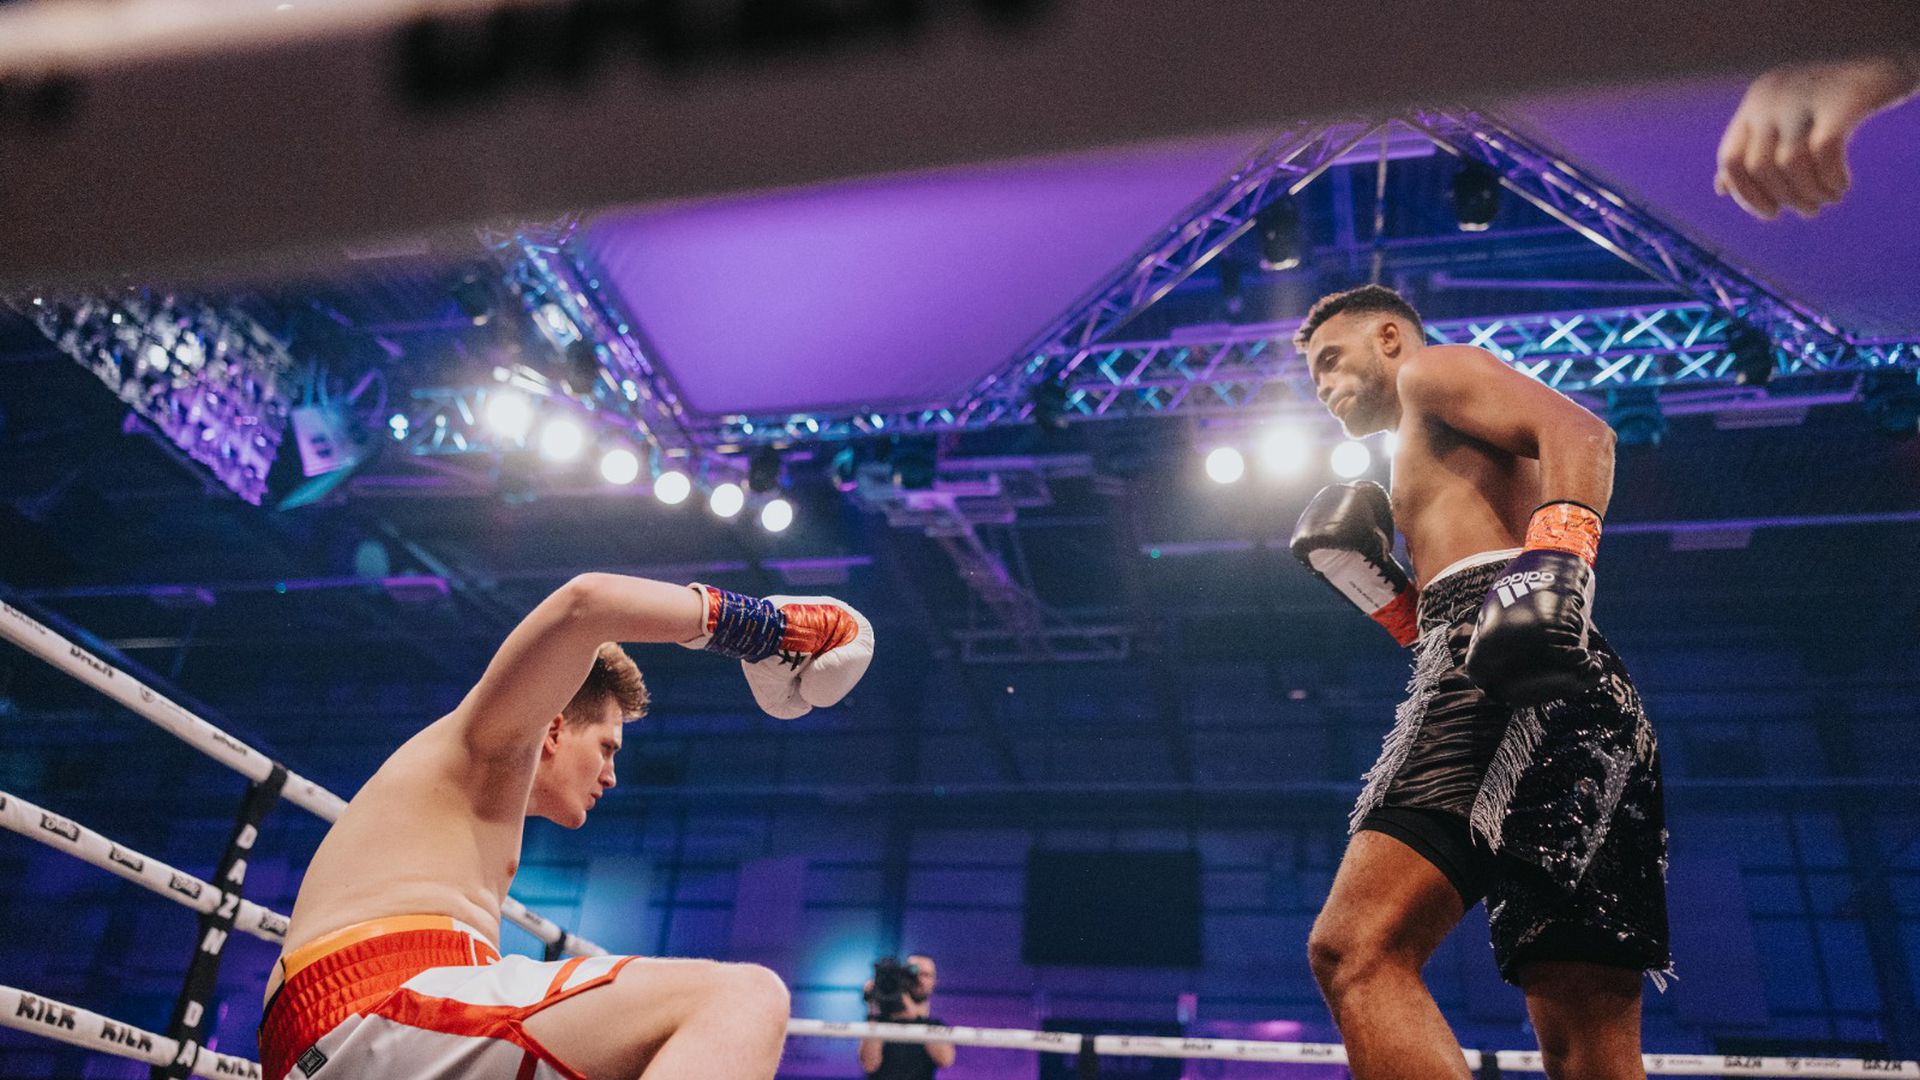 anderson silva’s son gabriel fights anthony taylor in misfits boxing 13 championship bout